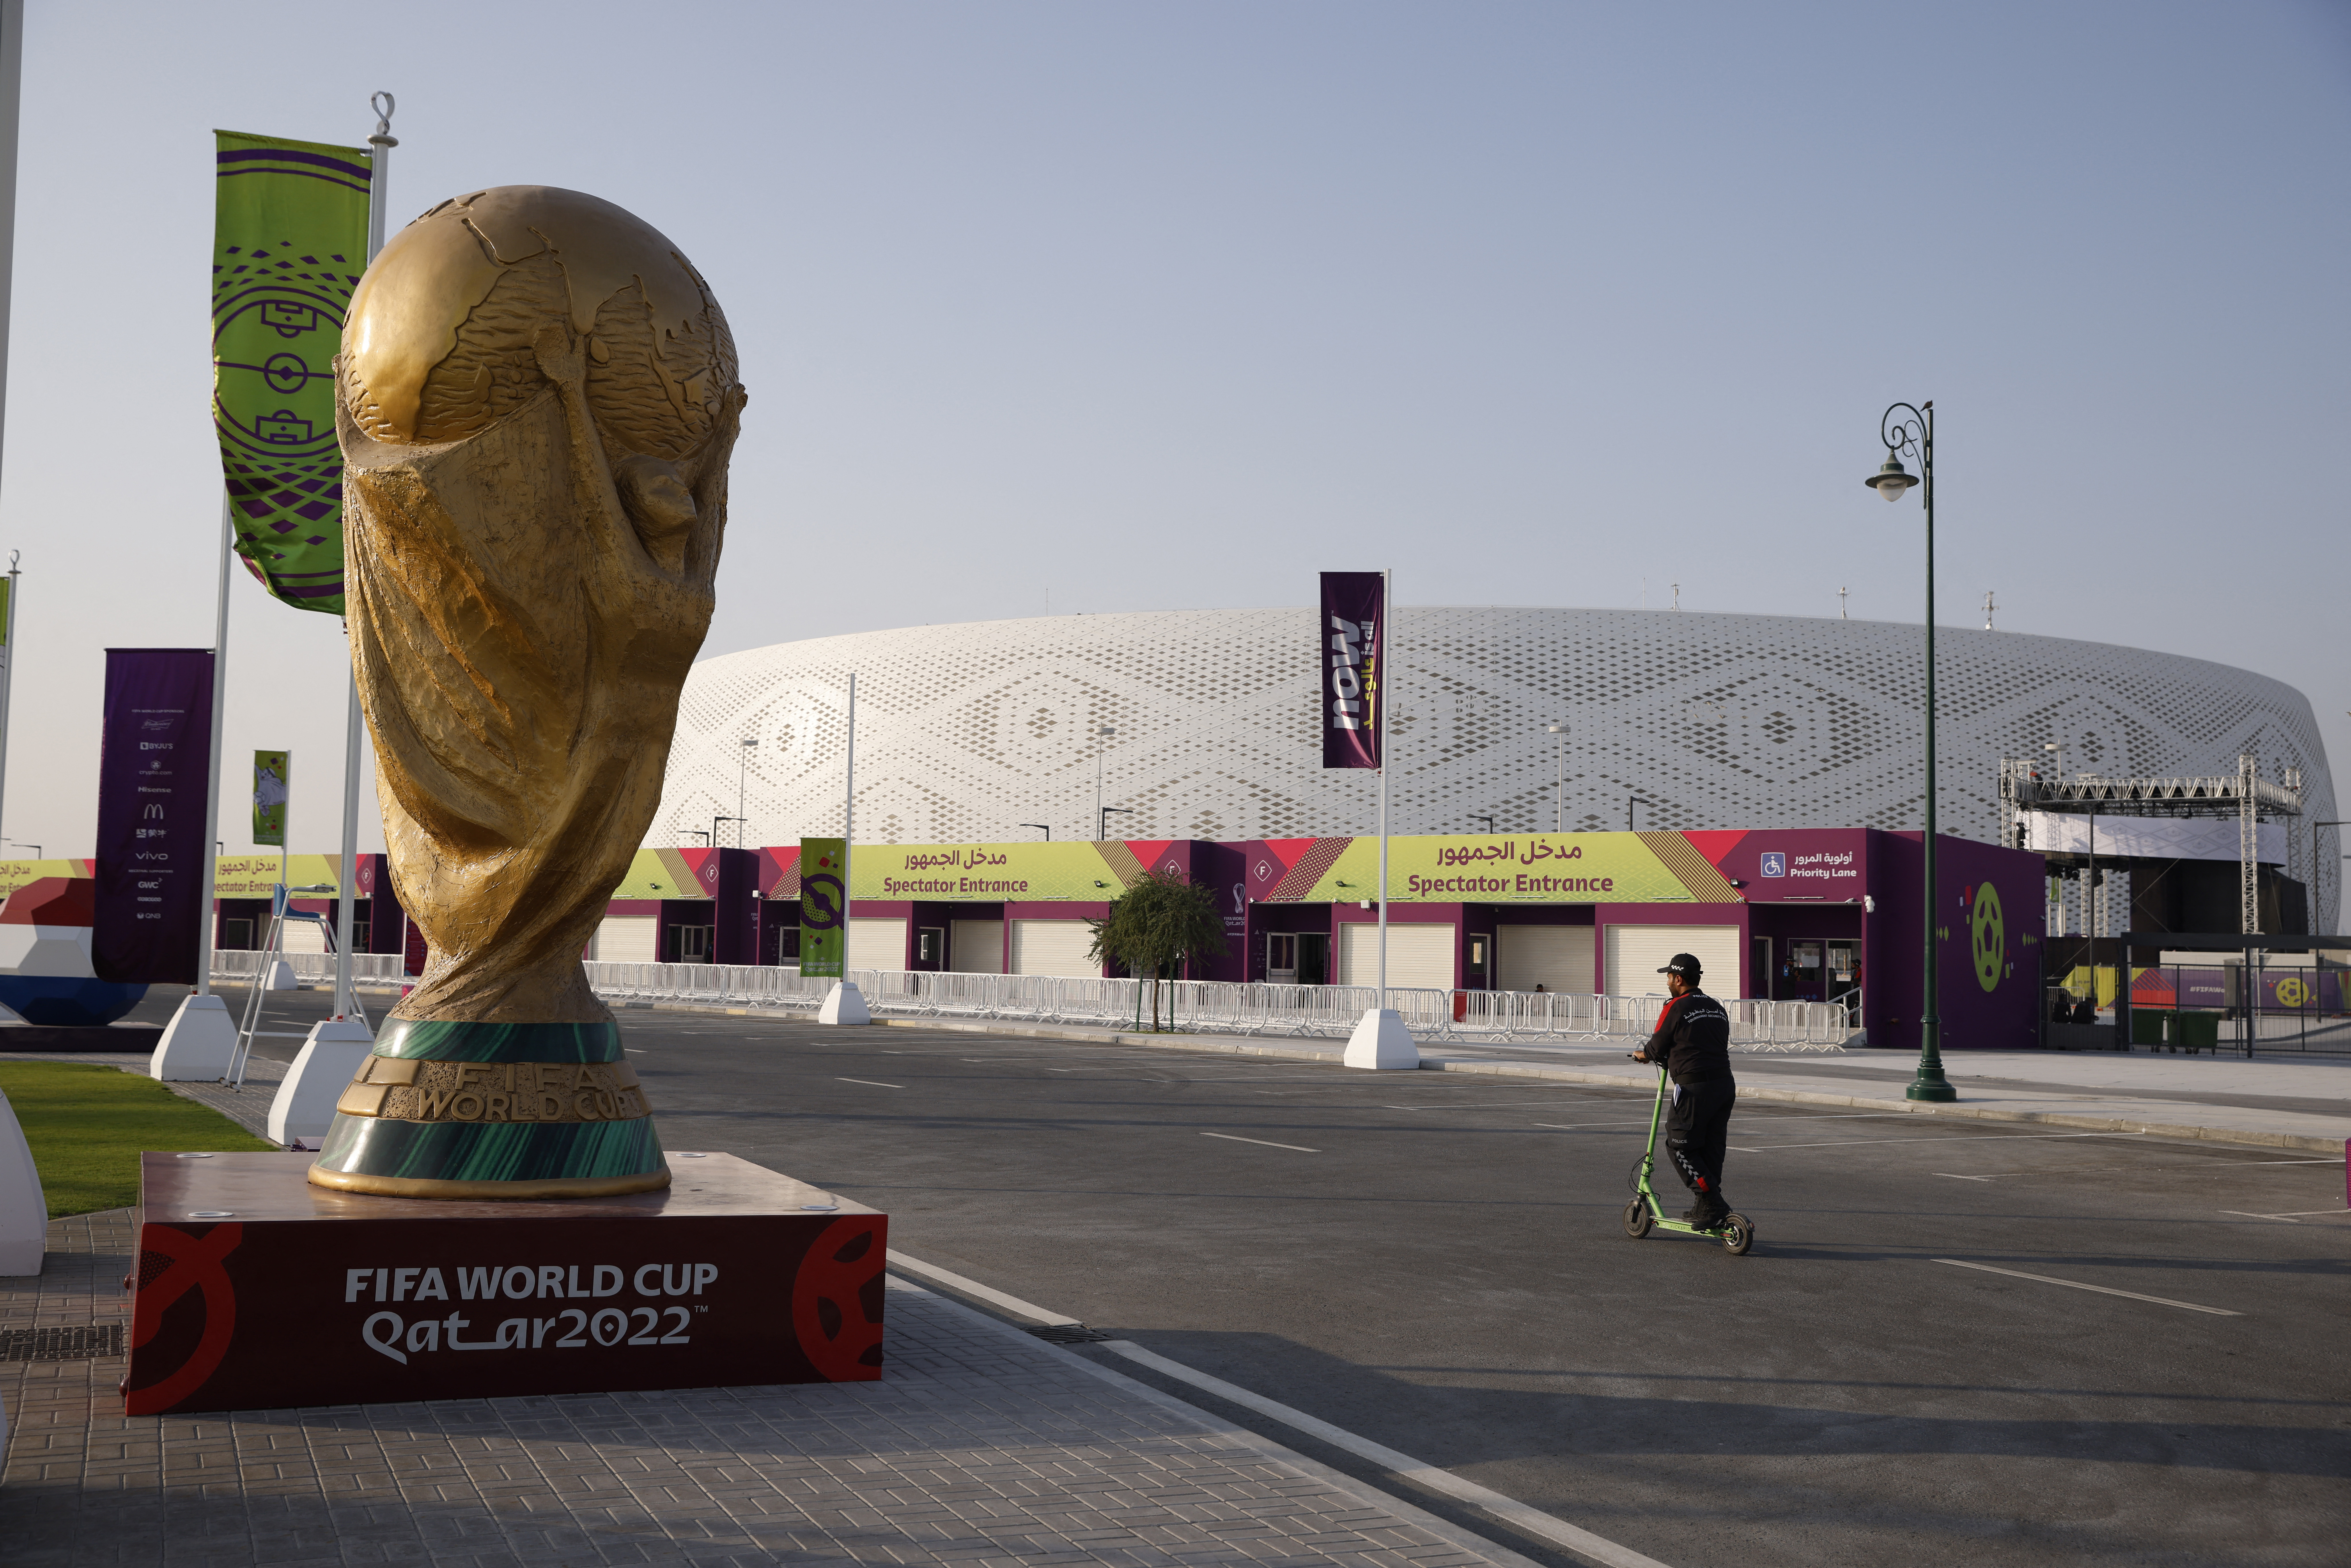 FIFA World Cup 2022 schedule: FIFA World Cup 2022's Day 10